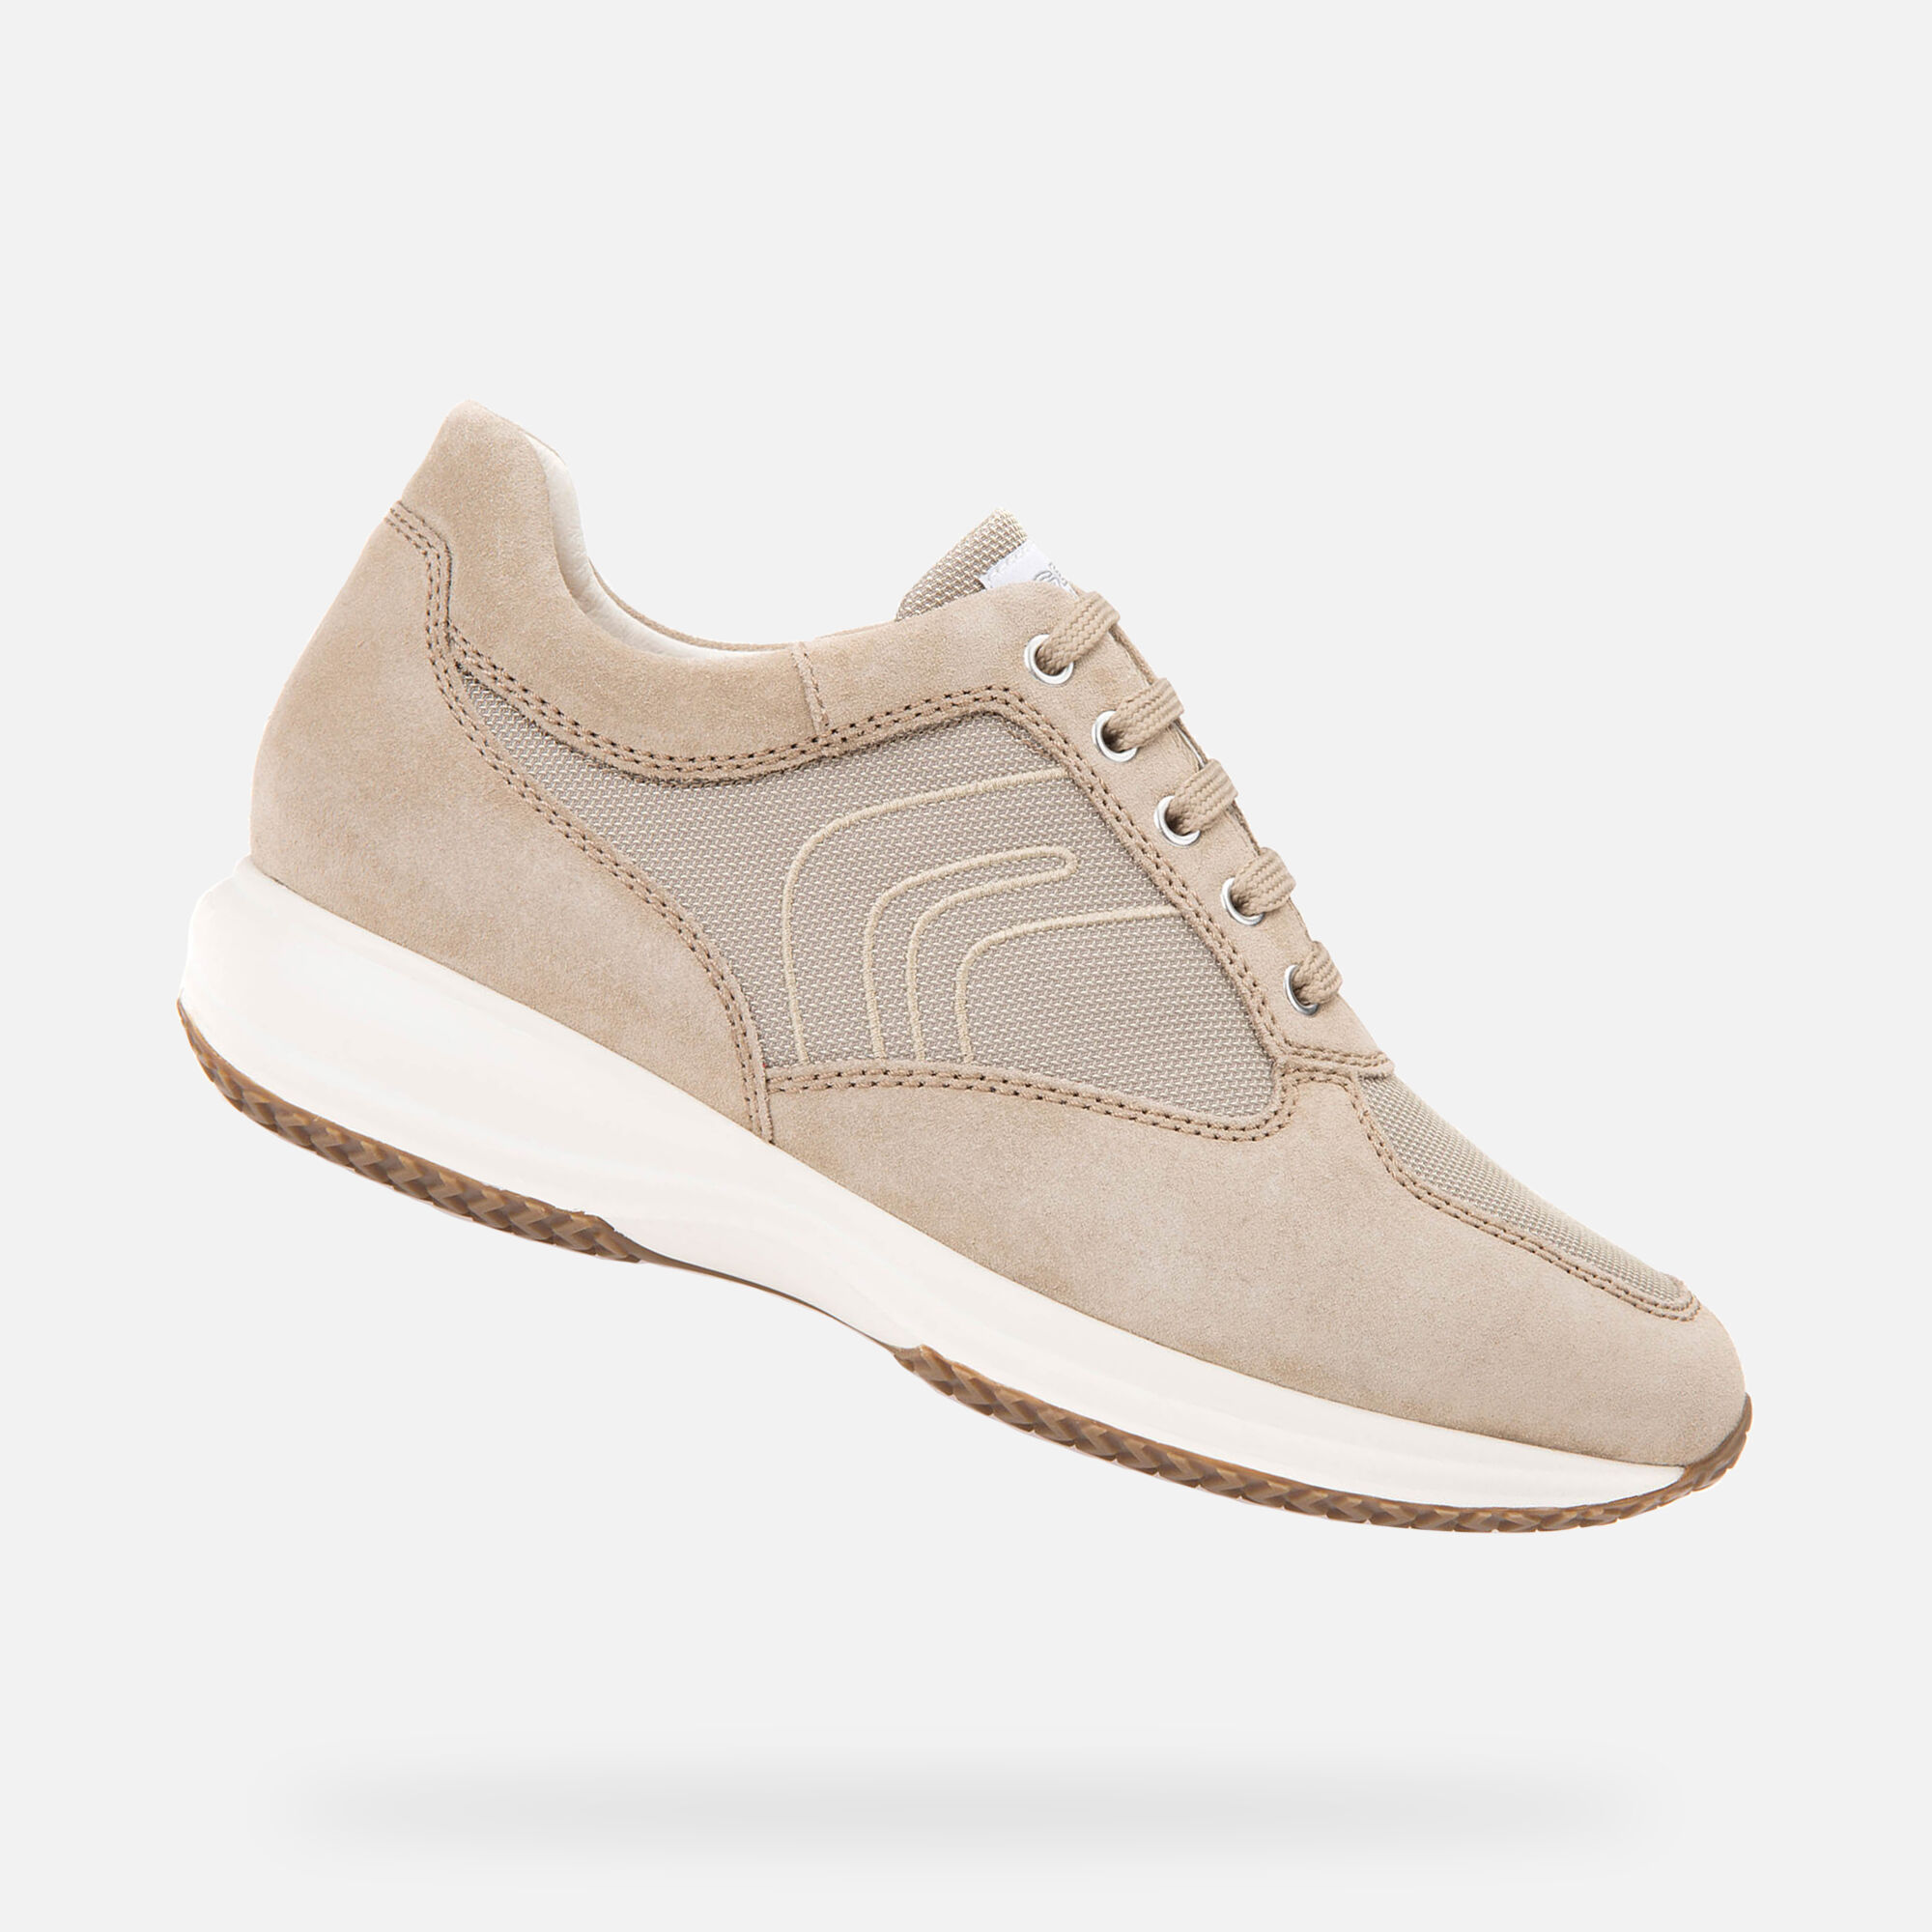 Geox HAPPY Man: Sand Sneakers | Geox ® Official Store